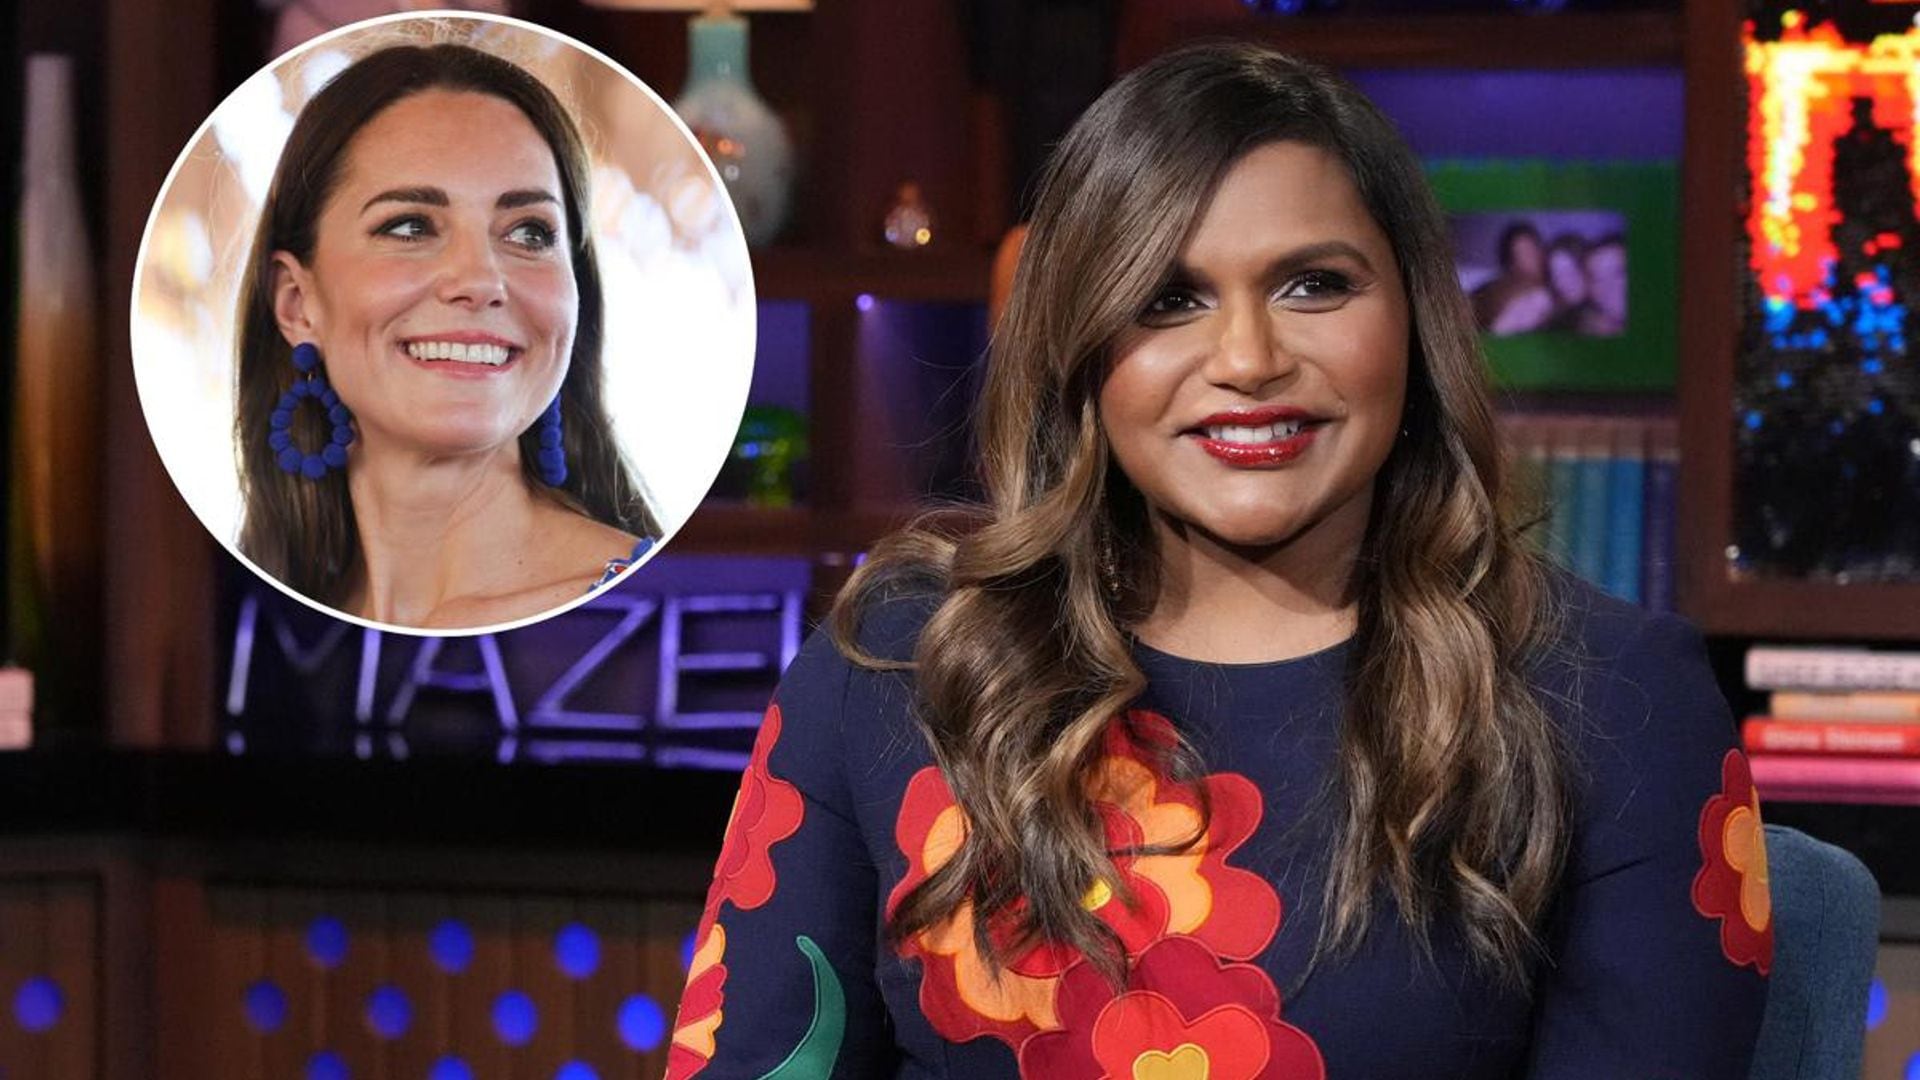 What Mindy Kaling had to say about one of Kate Middleton's looks